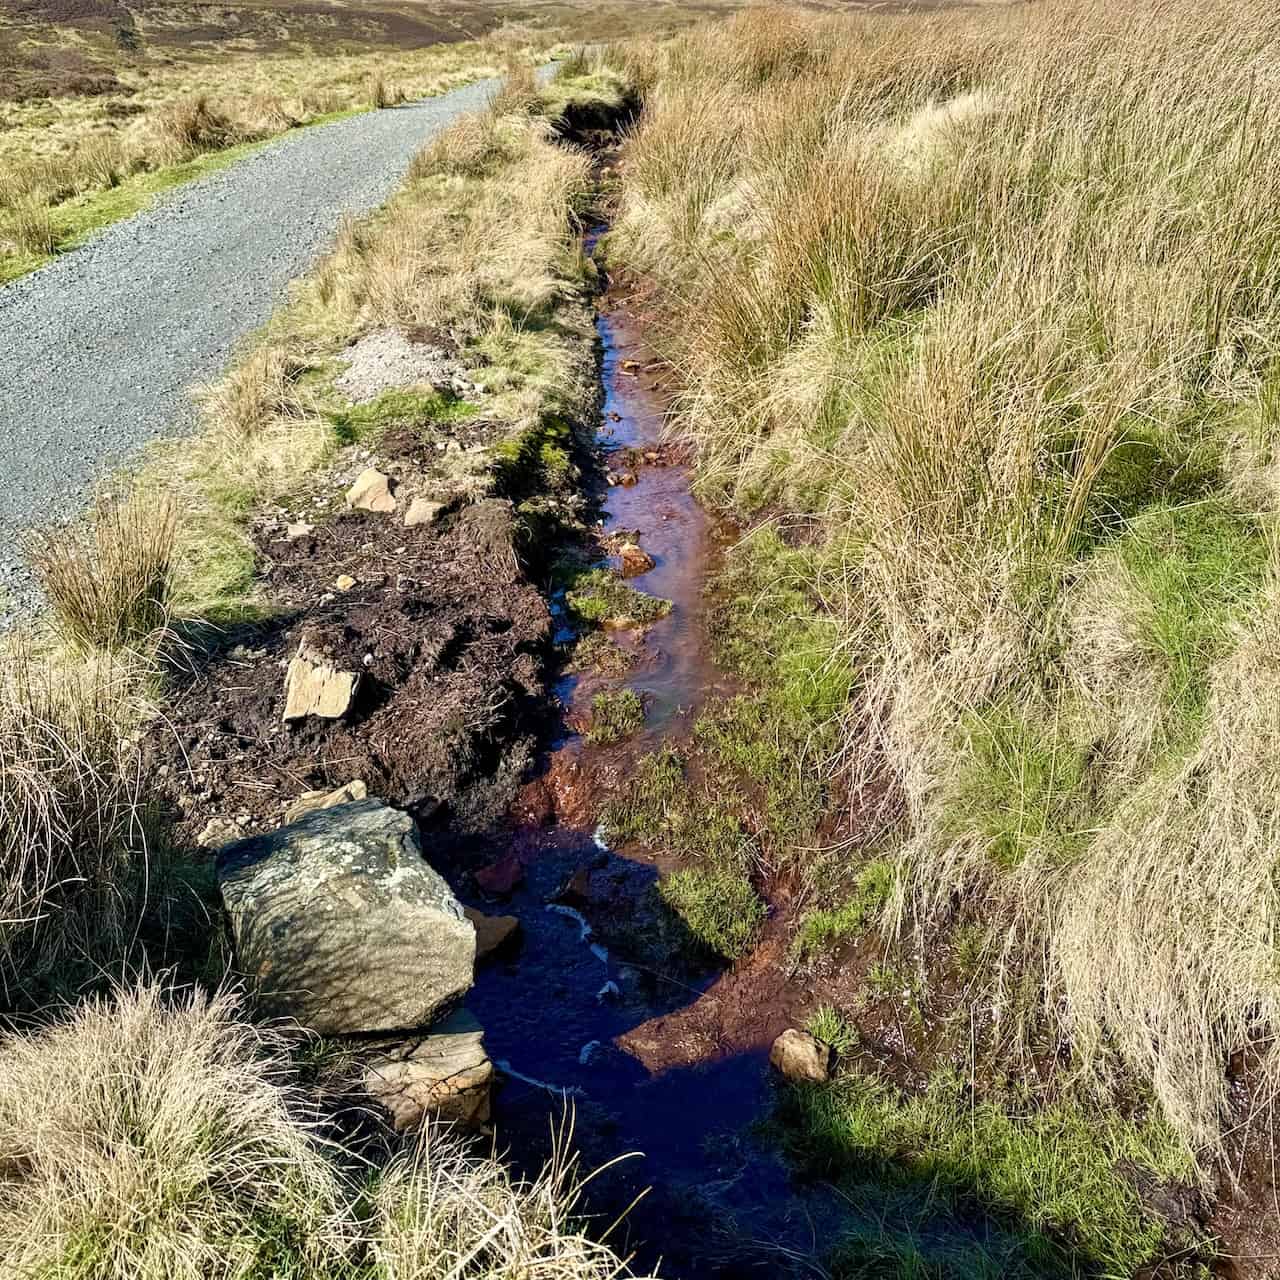 The orange-coloured water in streams, rivers, and standing bodies of water in the North York Moors is often a consequence of iron-rich groundwater seeping into these water bodies. As the iron dissolves and then oxidises, it imparts a striking orange or reddish hue to the water, especially notable in areas of past mining activities that have exposed ironstone to the elements. However, natural processes also contribute to this effect.